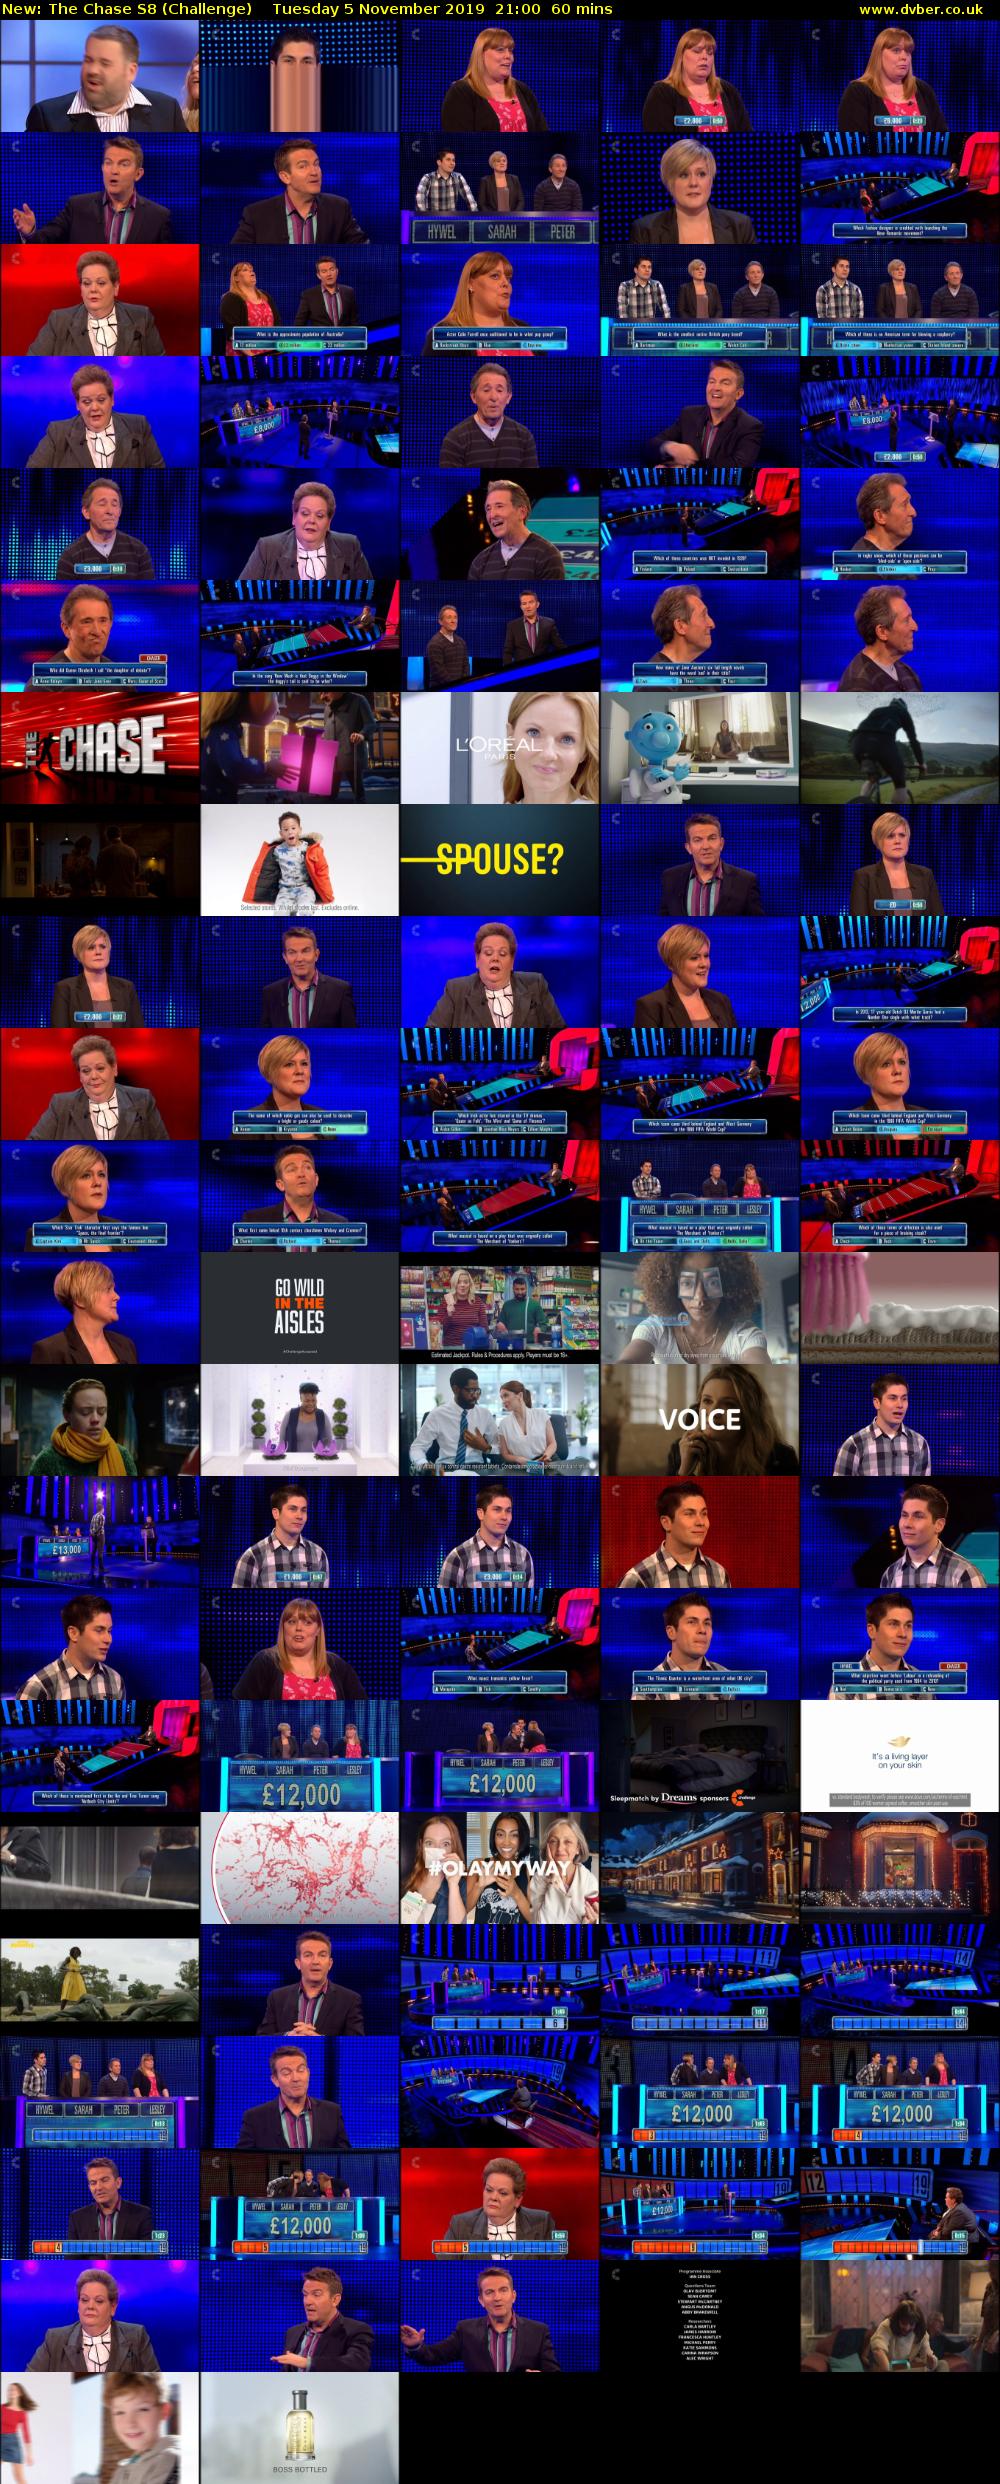 The Chase S8 (Challenge) Tuesday 5 November 2019 21:00 - 22:00